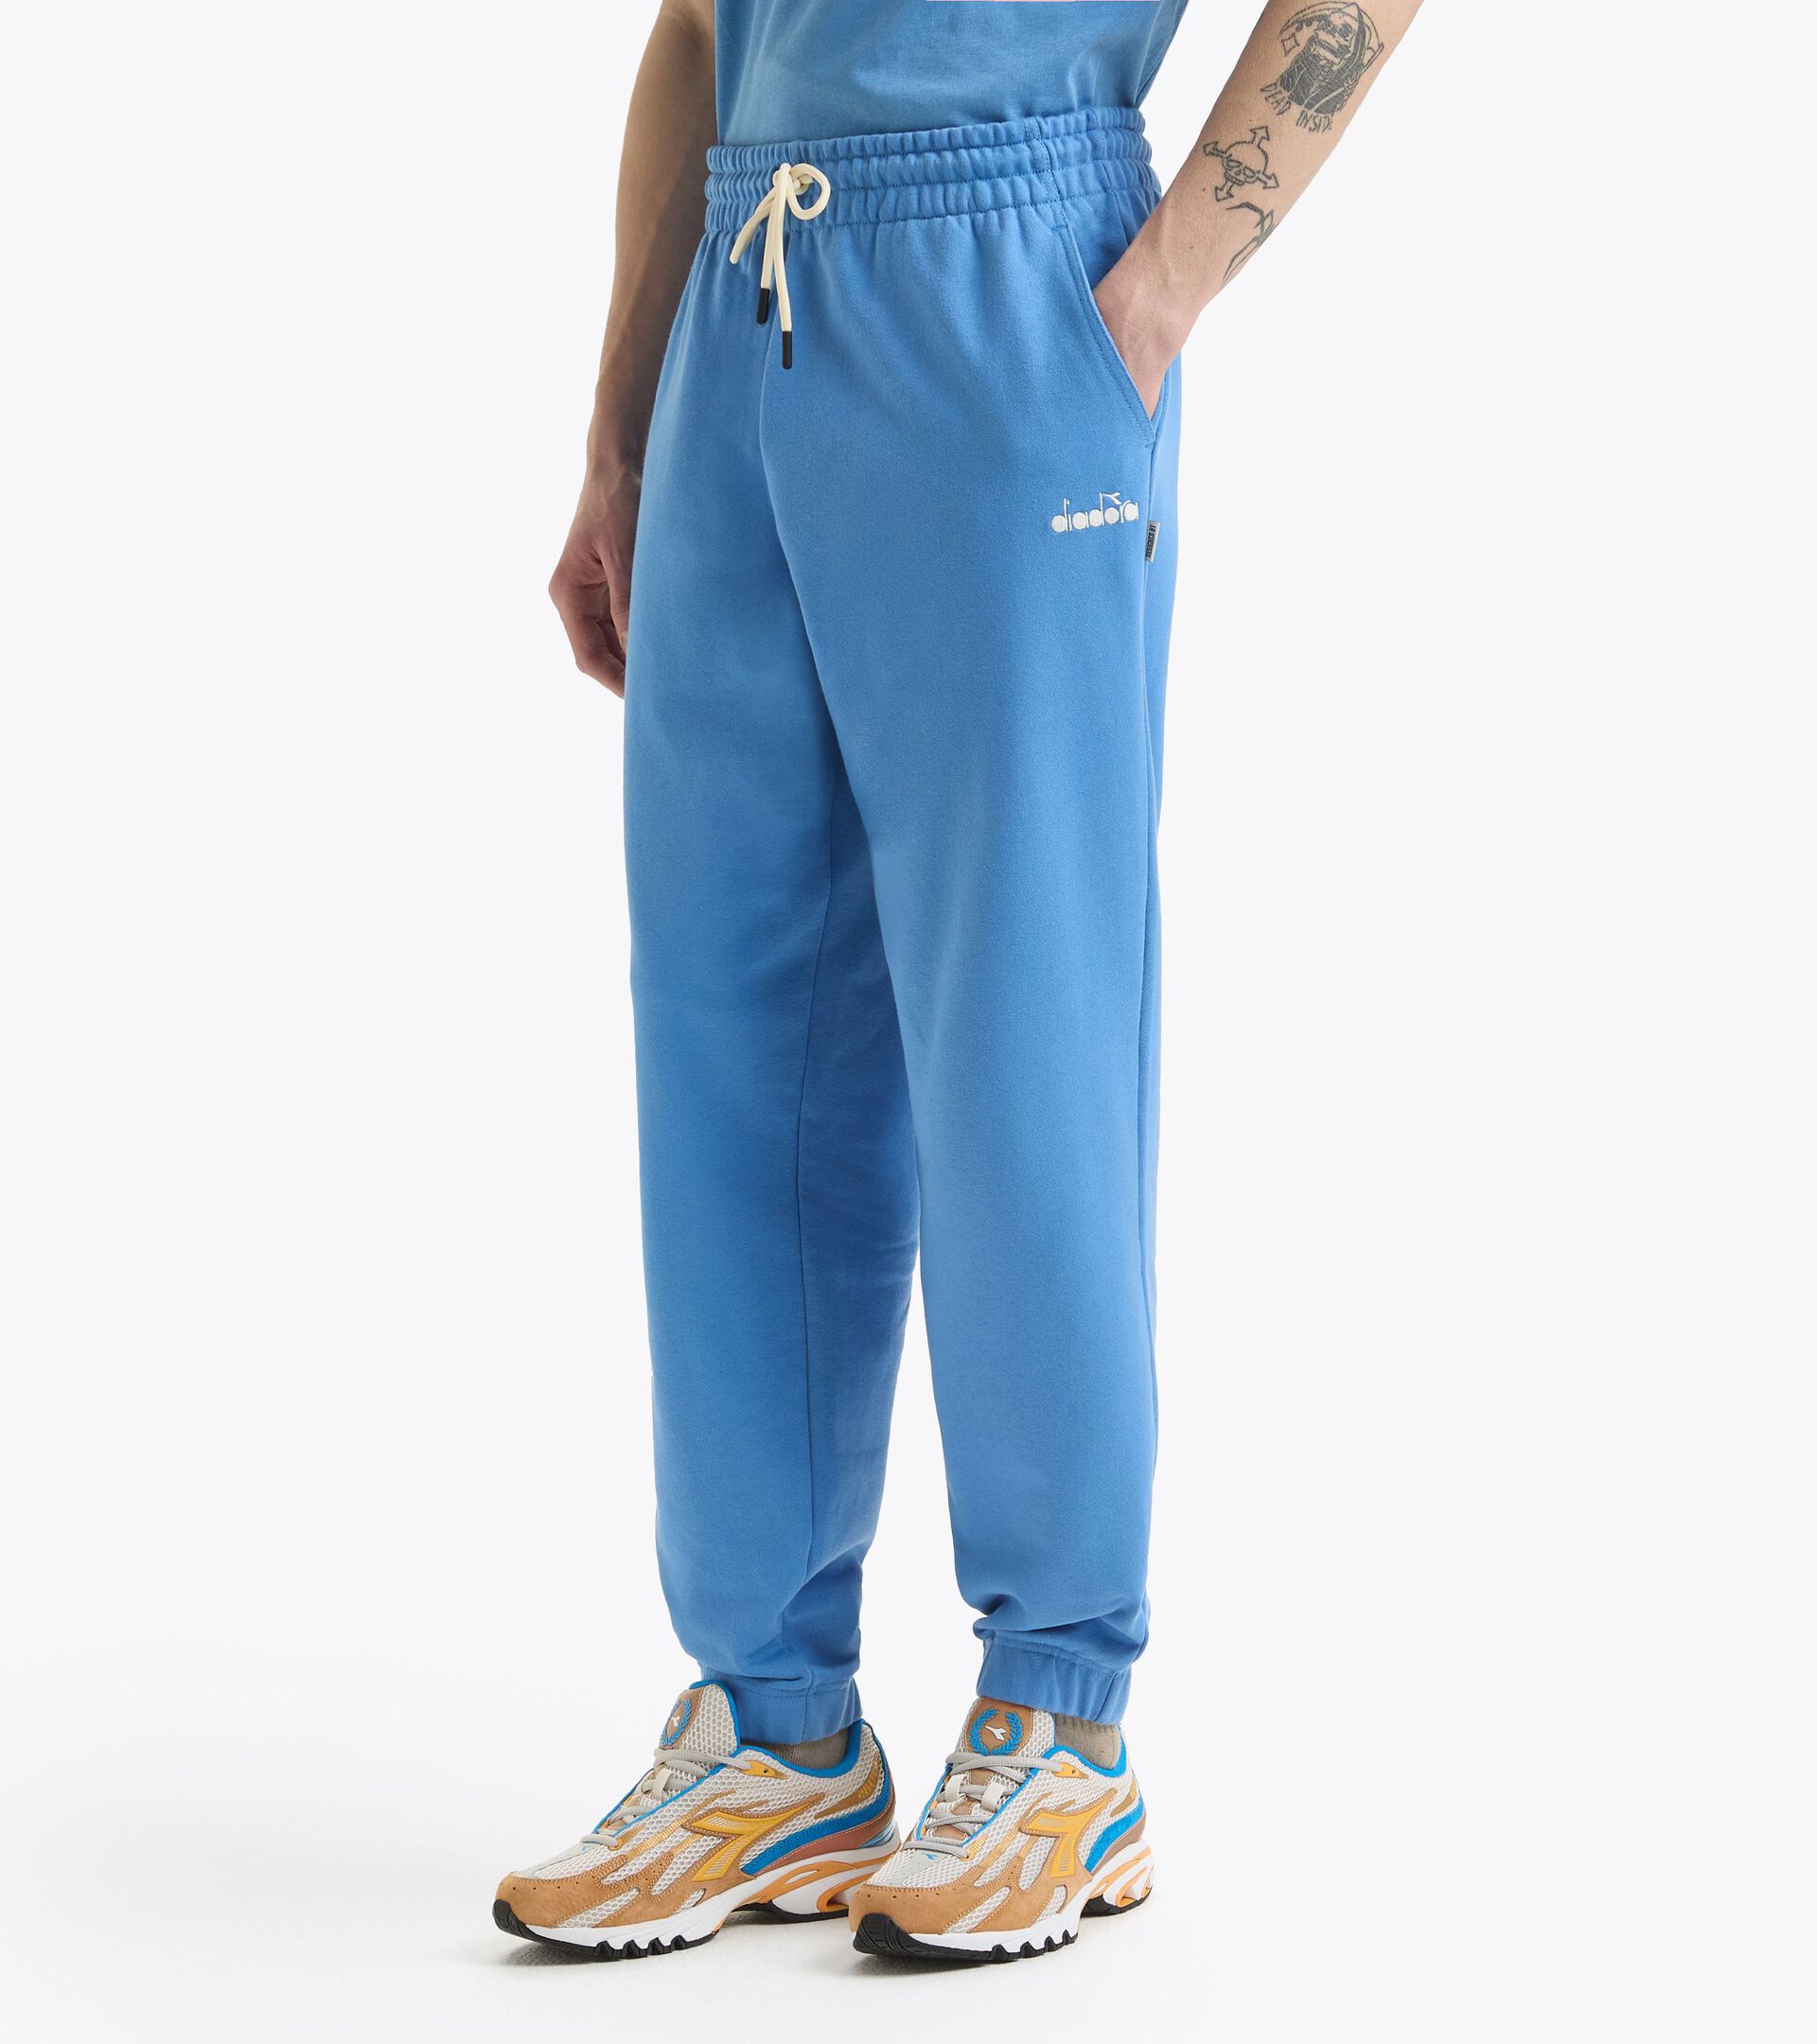 Joggers - Made in Italy - Gender Neutral JOGGER PANTS LEGACY PACIFIC COAST - Diadora